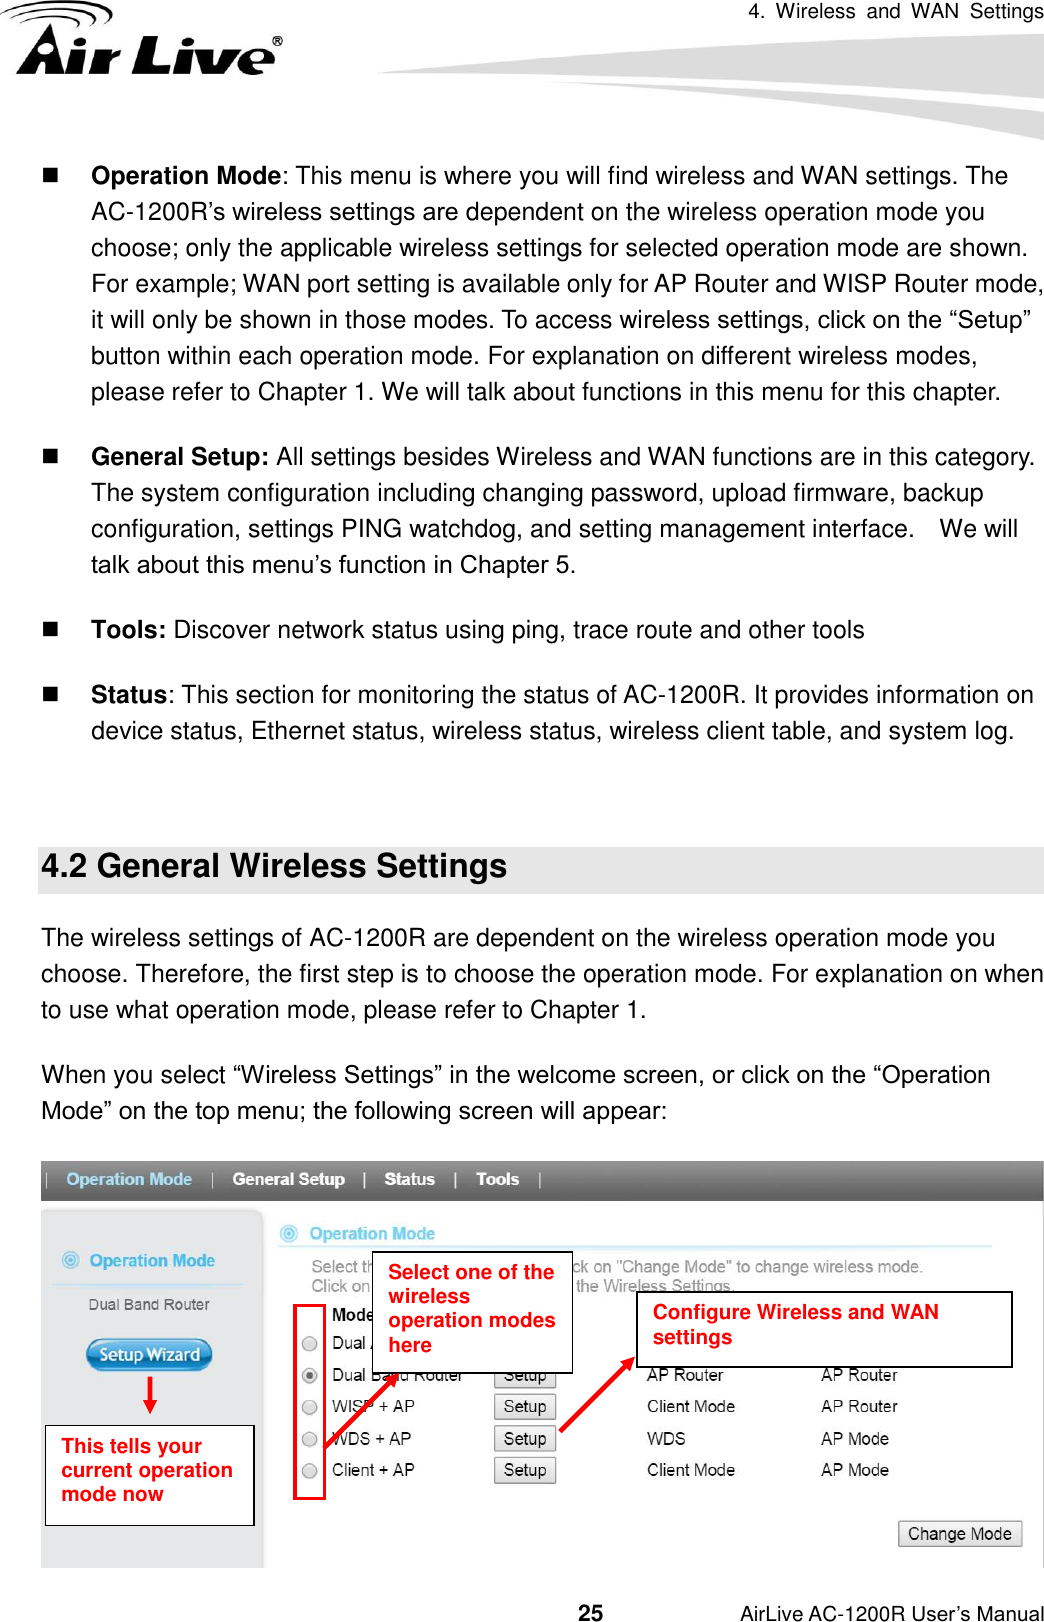 4.  Wireless  and  WAN  Settings                                         25           AirLive AC-1200R User’s Manual  Operation Mode: This menu is where you will find wireless and WAN settings. The AC-1200R’s wireless settings are dependent on the wireless operation mode you choose; only the applicable wireless settings for selected operation mode are shown.   For example; WAN port setting is available only for AP Router and WISP Router mode, it will only be shown in those modes. To access wireless settings, click on the “Setup” button within each operation mode. For explanation on different wireless modes, please refer to Chapter 1. We will talk about functions in this menu for this chapter.  General Setup: All settings besides Wireless and WAN functions are in this category. The system configuration including changing password, upload firmware, backup configuration, settings PING watchdog, and setting management interface.    We will talk about this menu’s function in Chapter 5.  Tools: Discover network status using ping, trace route and other tools  Status: This section for monitoring the status of AC-1200R. It provides information on device status, Ethernet status, wireless status, wireless client table, and system log.    4.2 General Wireless Settings The wireless settings of AC-1200R are dependent on the wireless operation mode you choose. Therefore, the first step is to choose the operation mode. For explanation on when to use what operation mode, please refer to Chapter 1.   When you select “Wireless Settings” in the welcome screen, or click on the “Operation Mode” on the top menu; the following screen will appear:  This tells your current operation mode now Select one of the wireless operation modes here Configure Wireless and WAN settings 